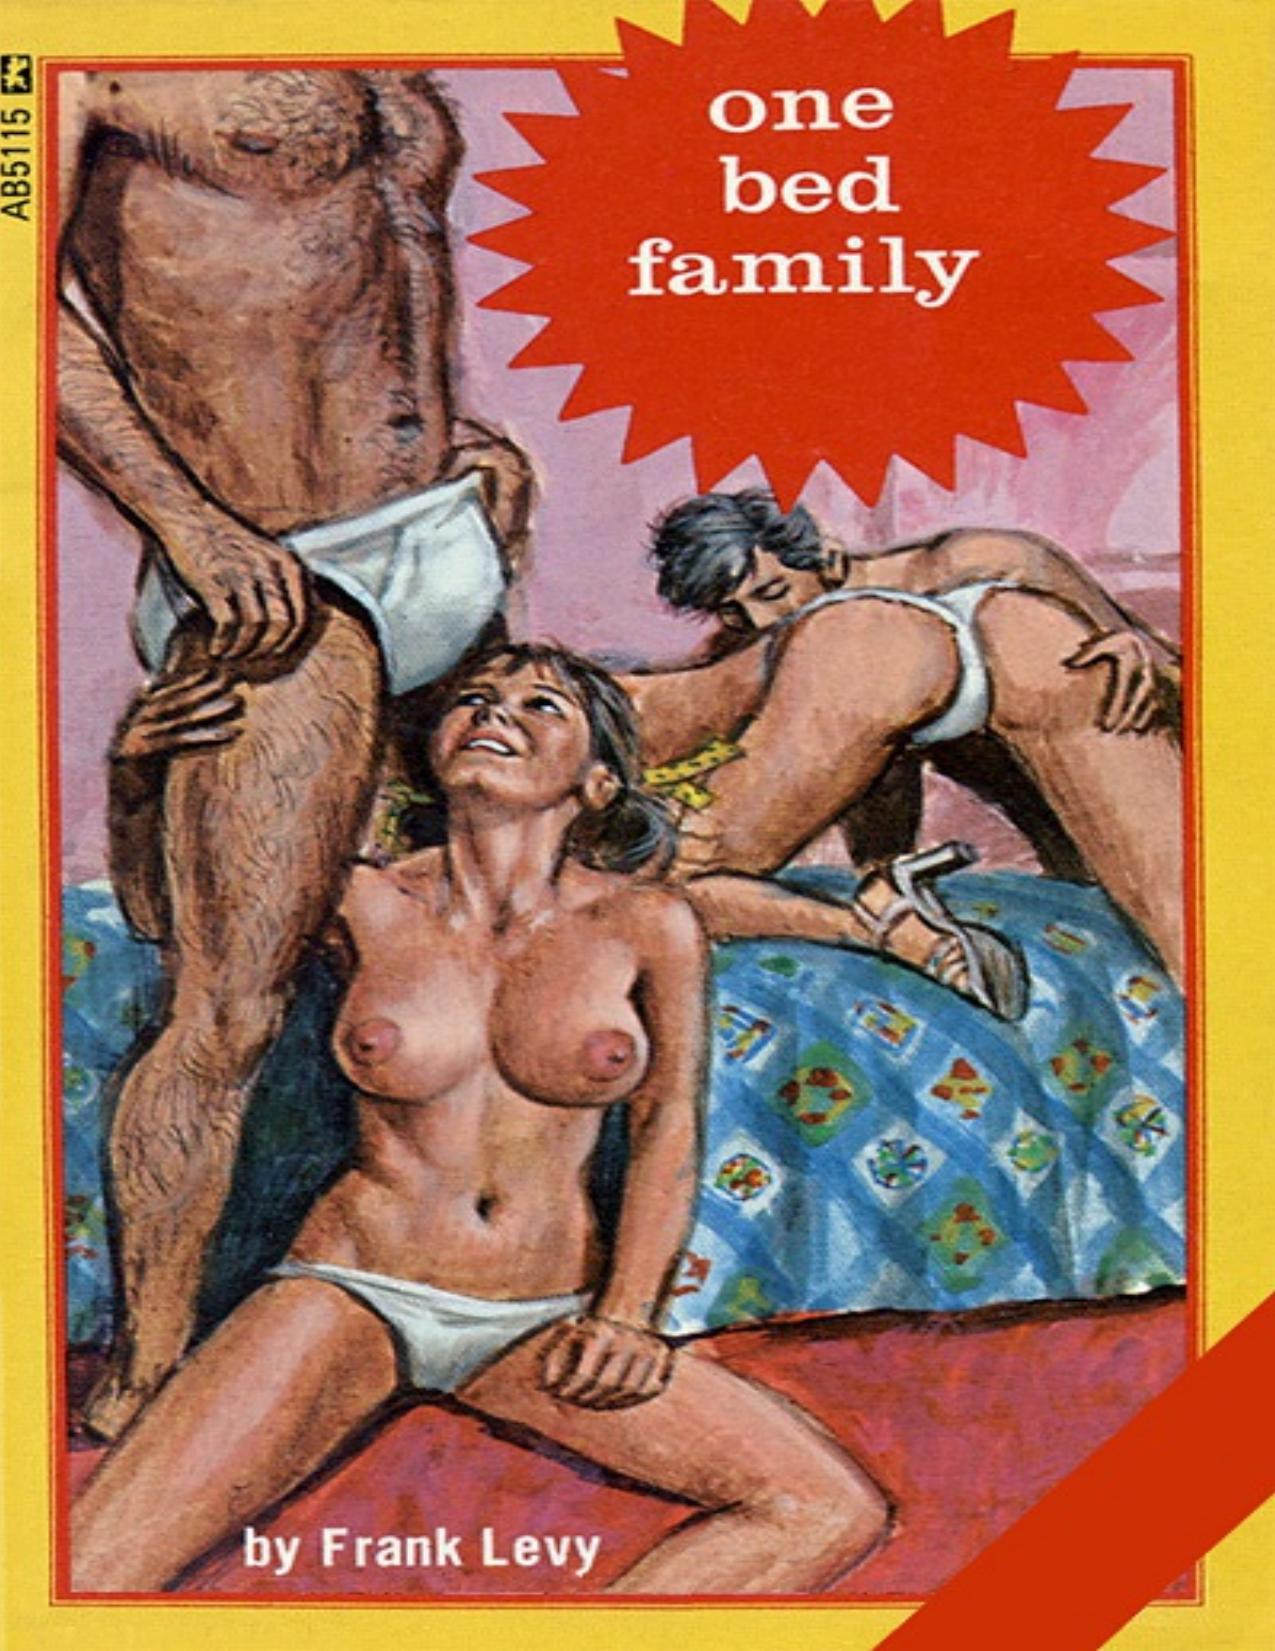 One Bed Family by Frank Levy